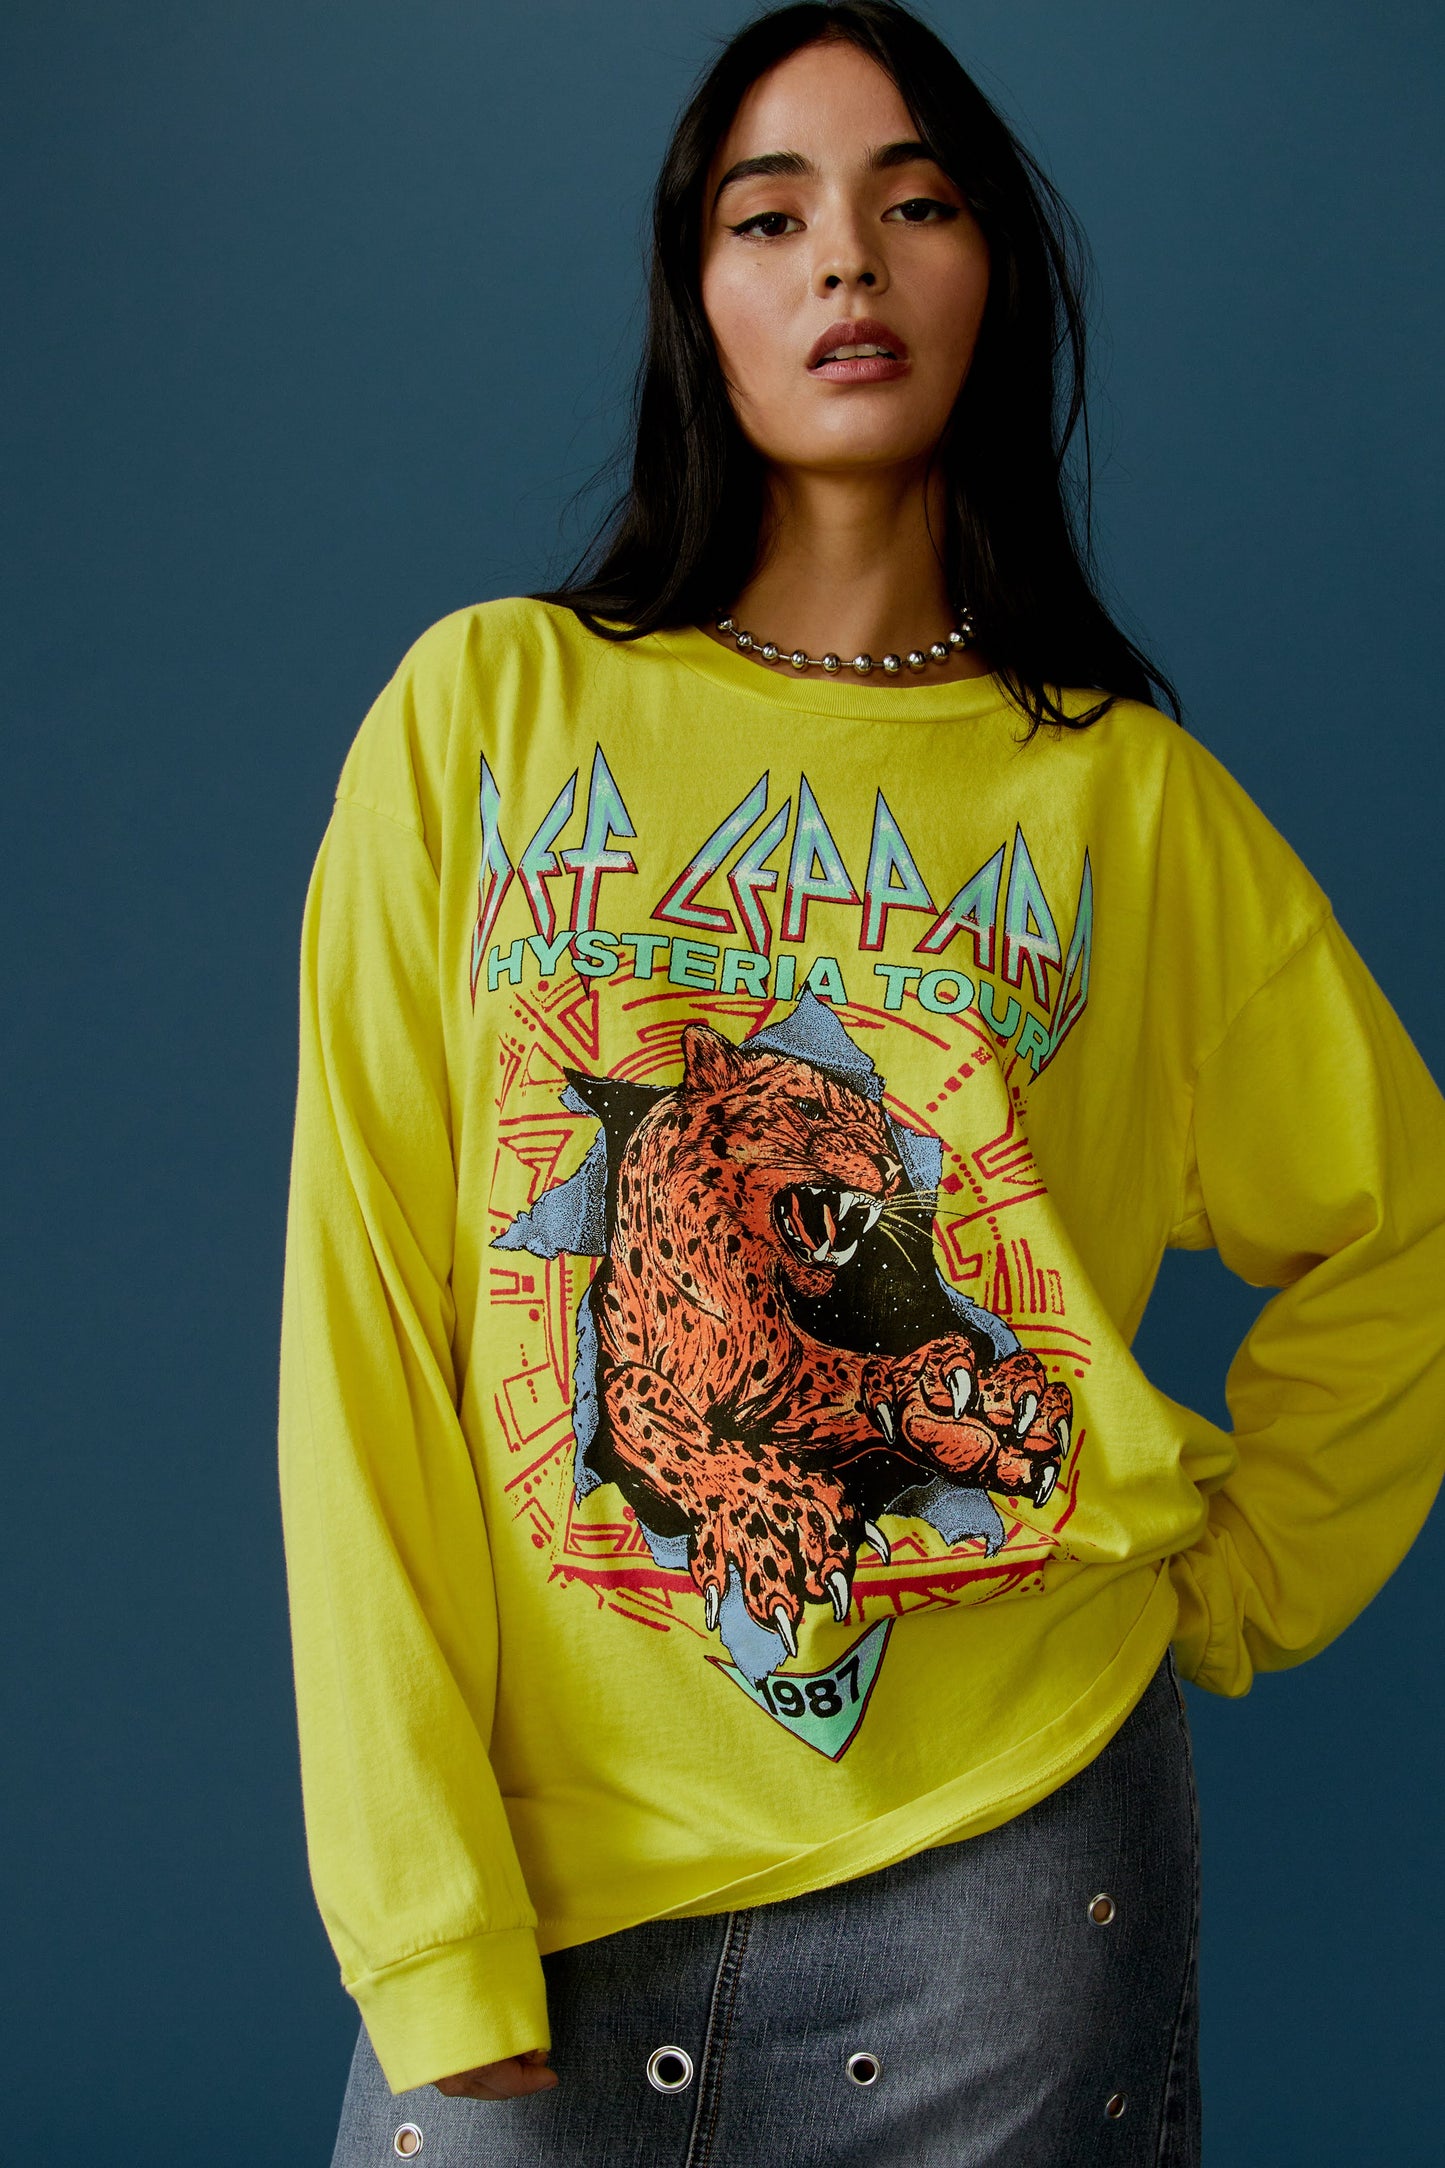 Brunette model in a Def Leppard bright yellow shirt